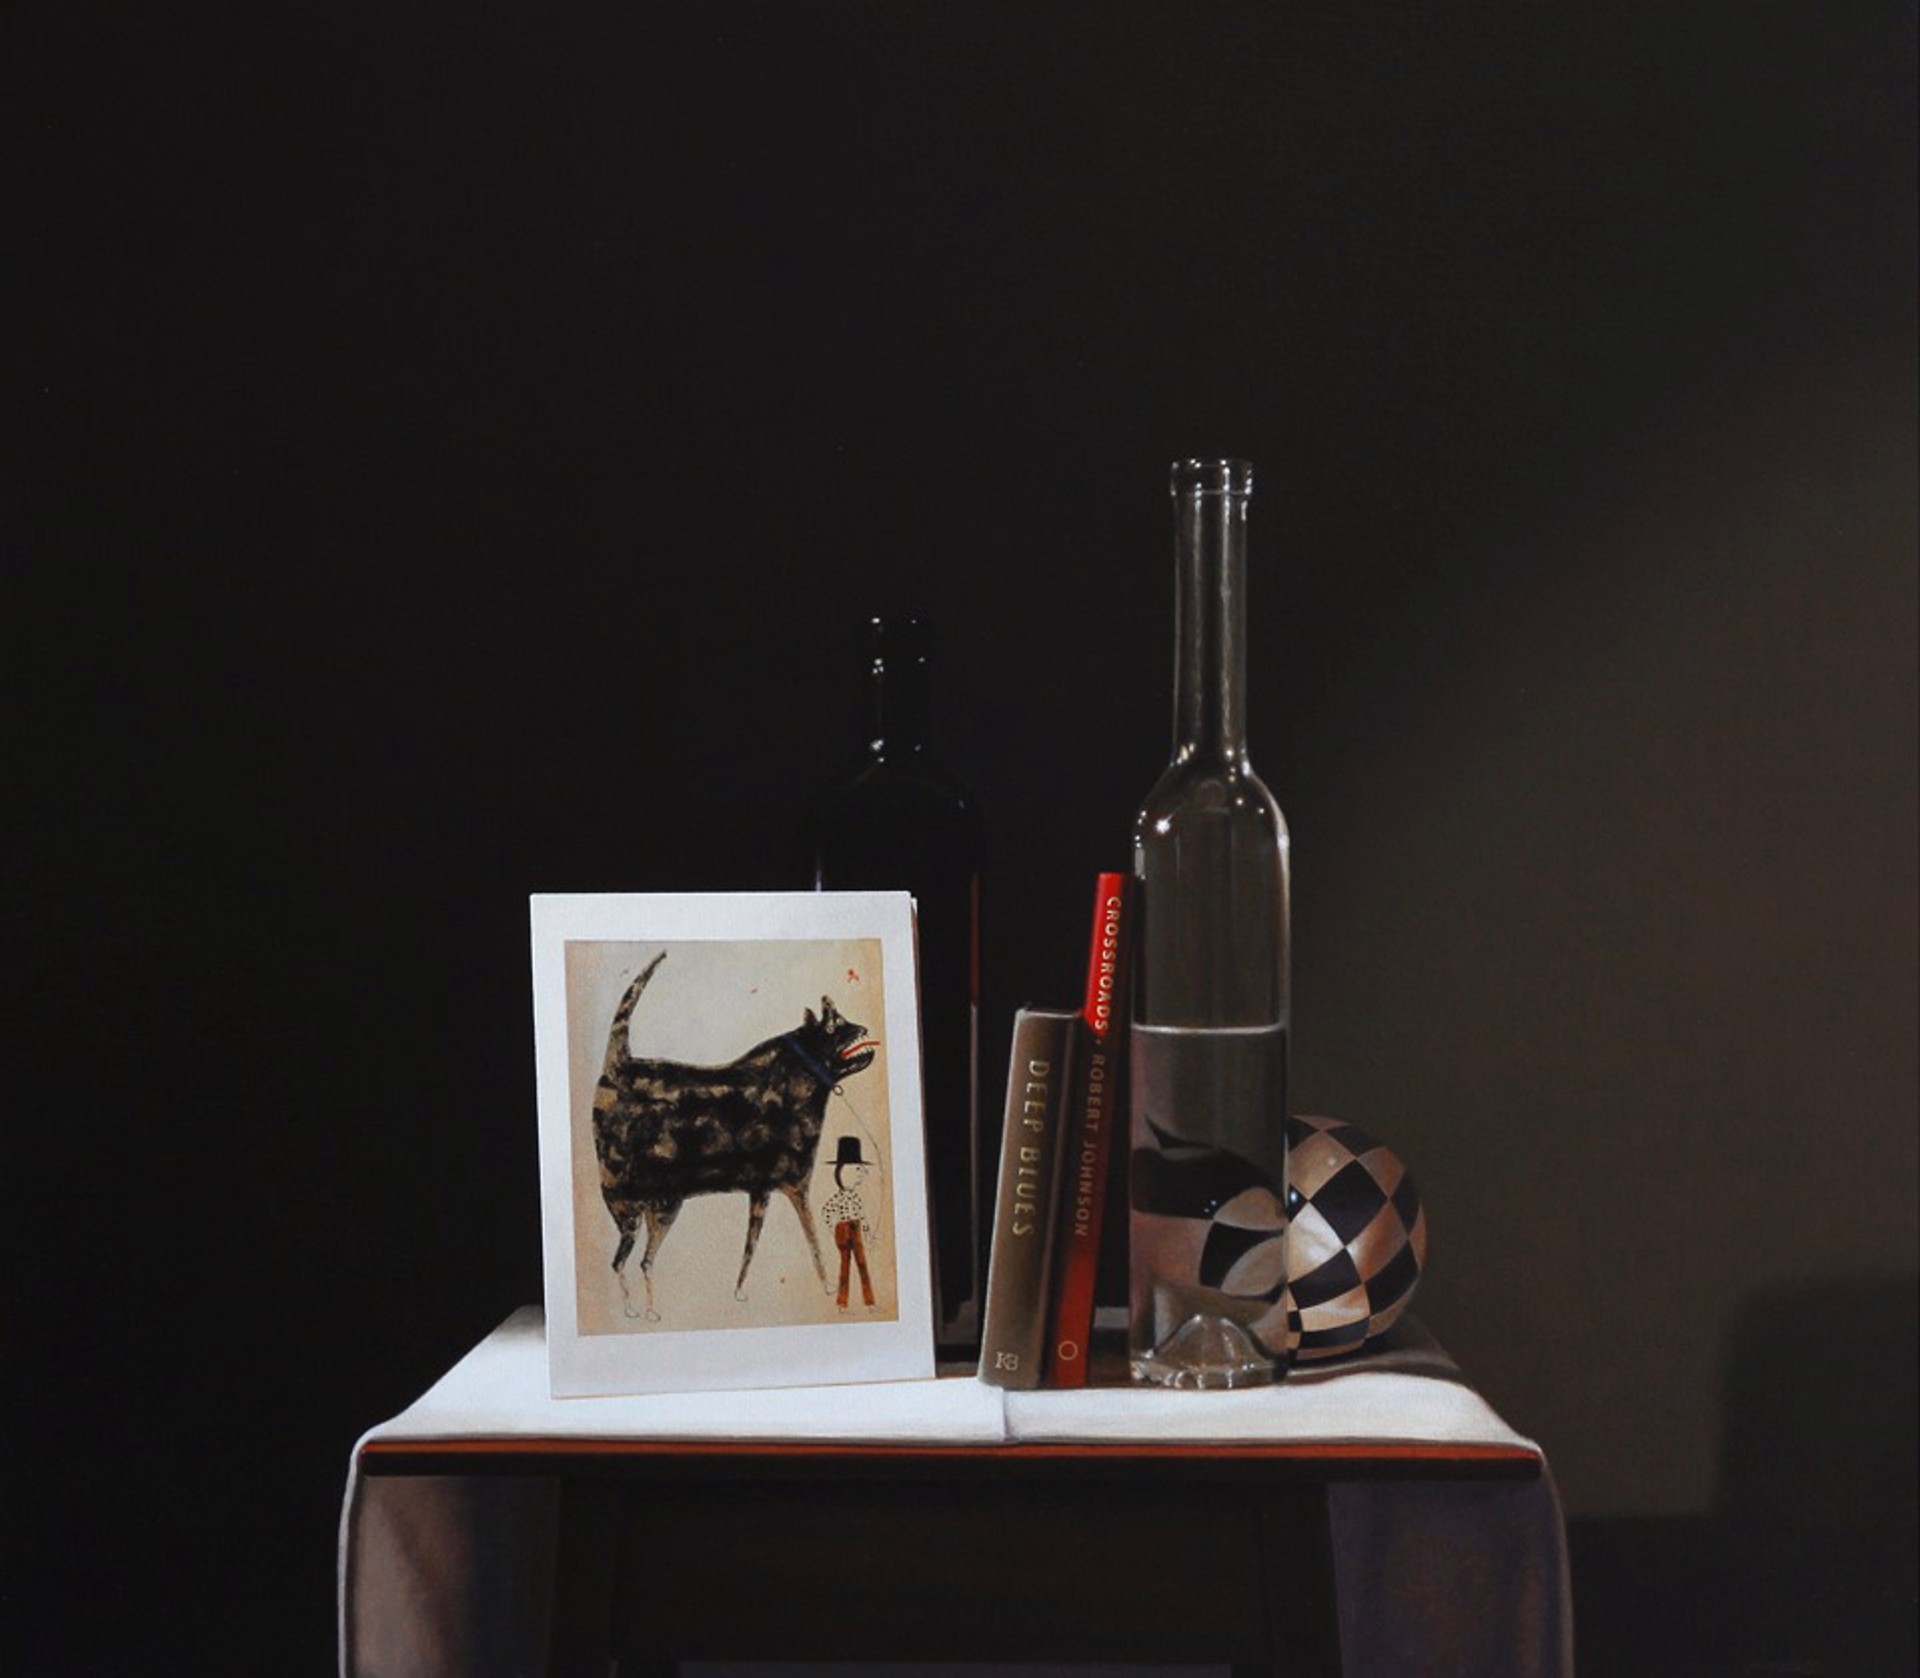 Still Life with Bill Traylor and Robert Johnson by Guy Diehl